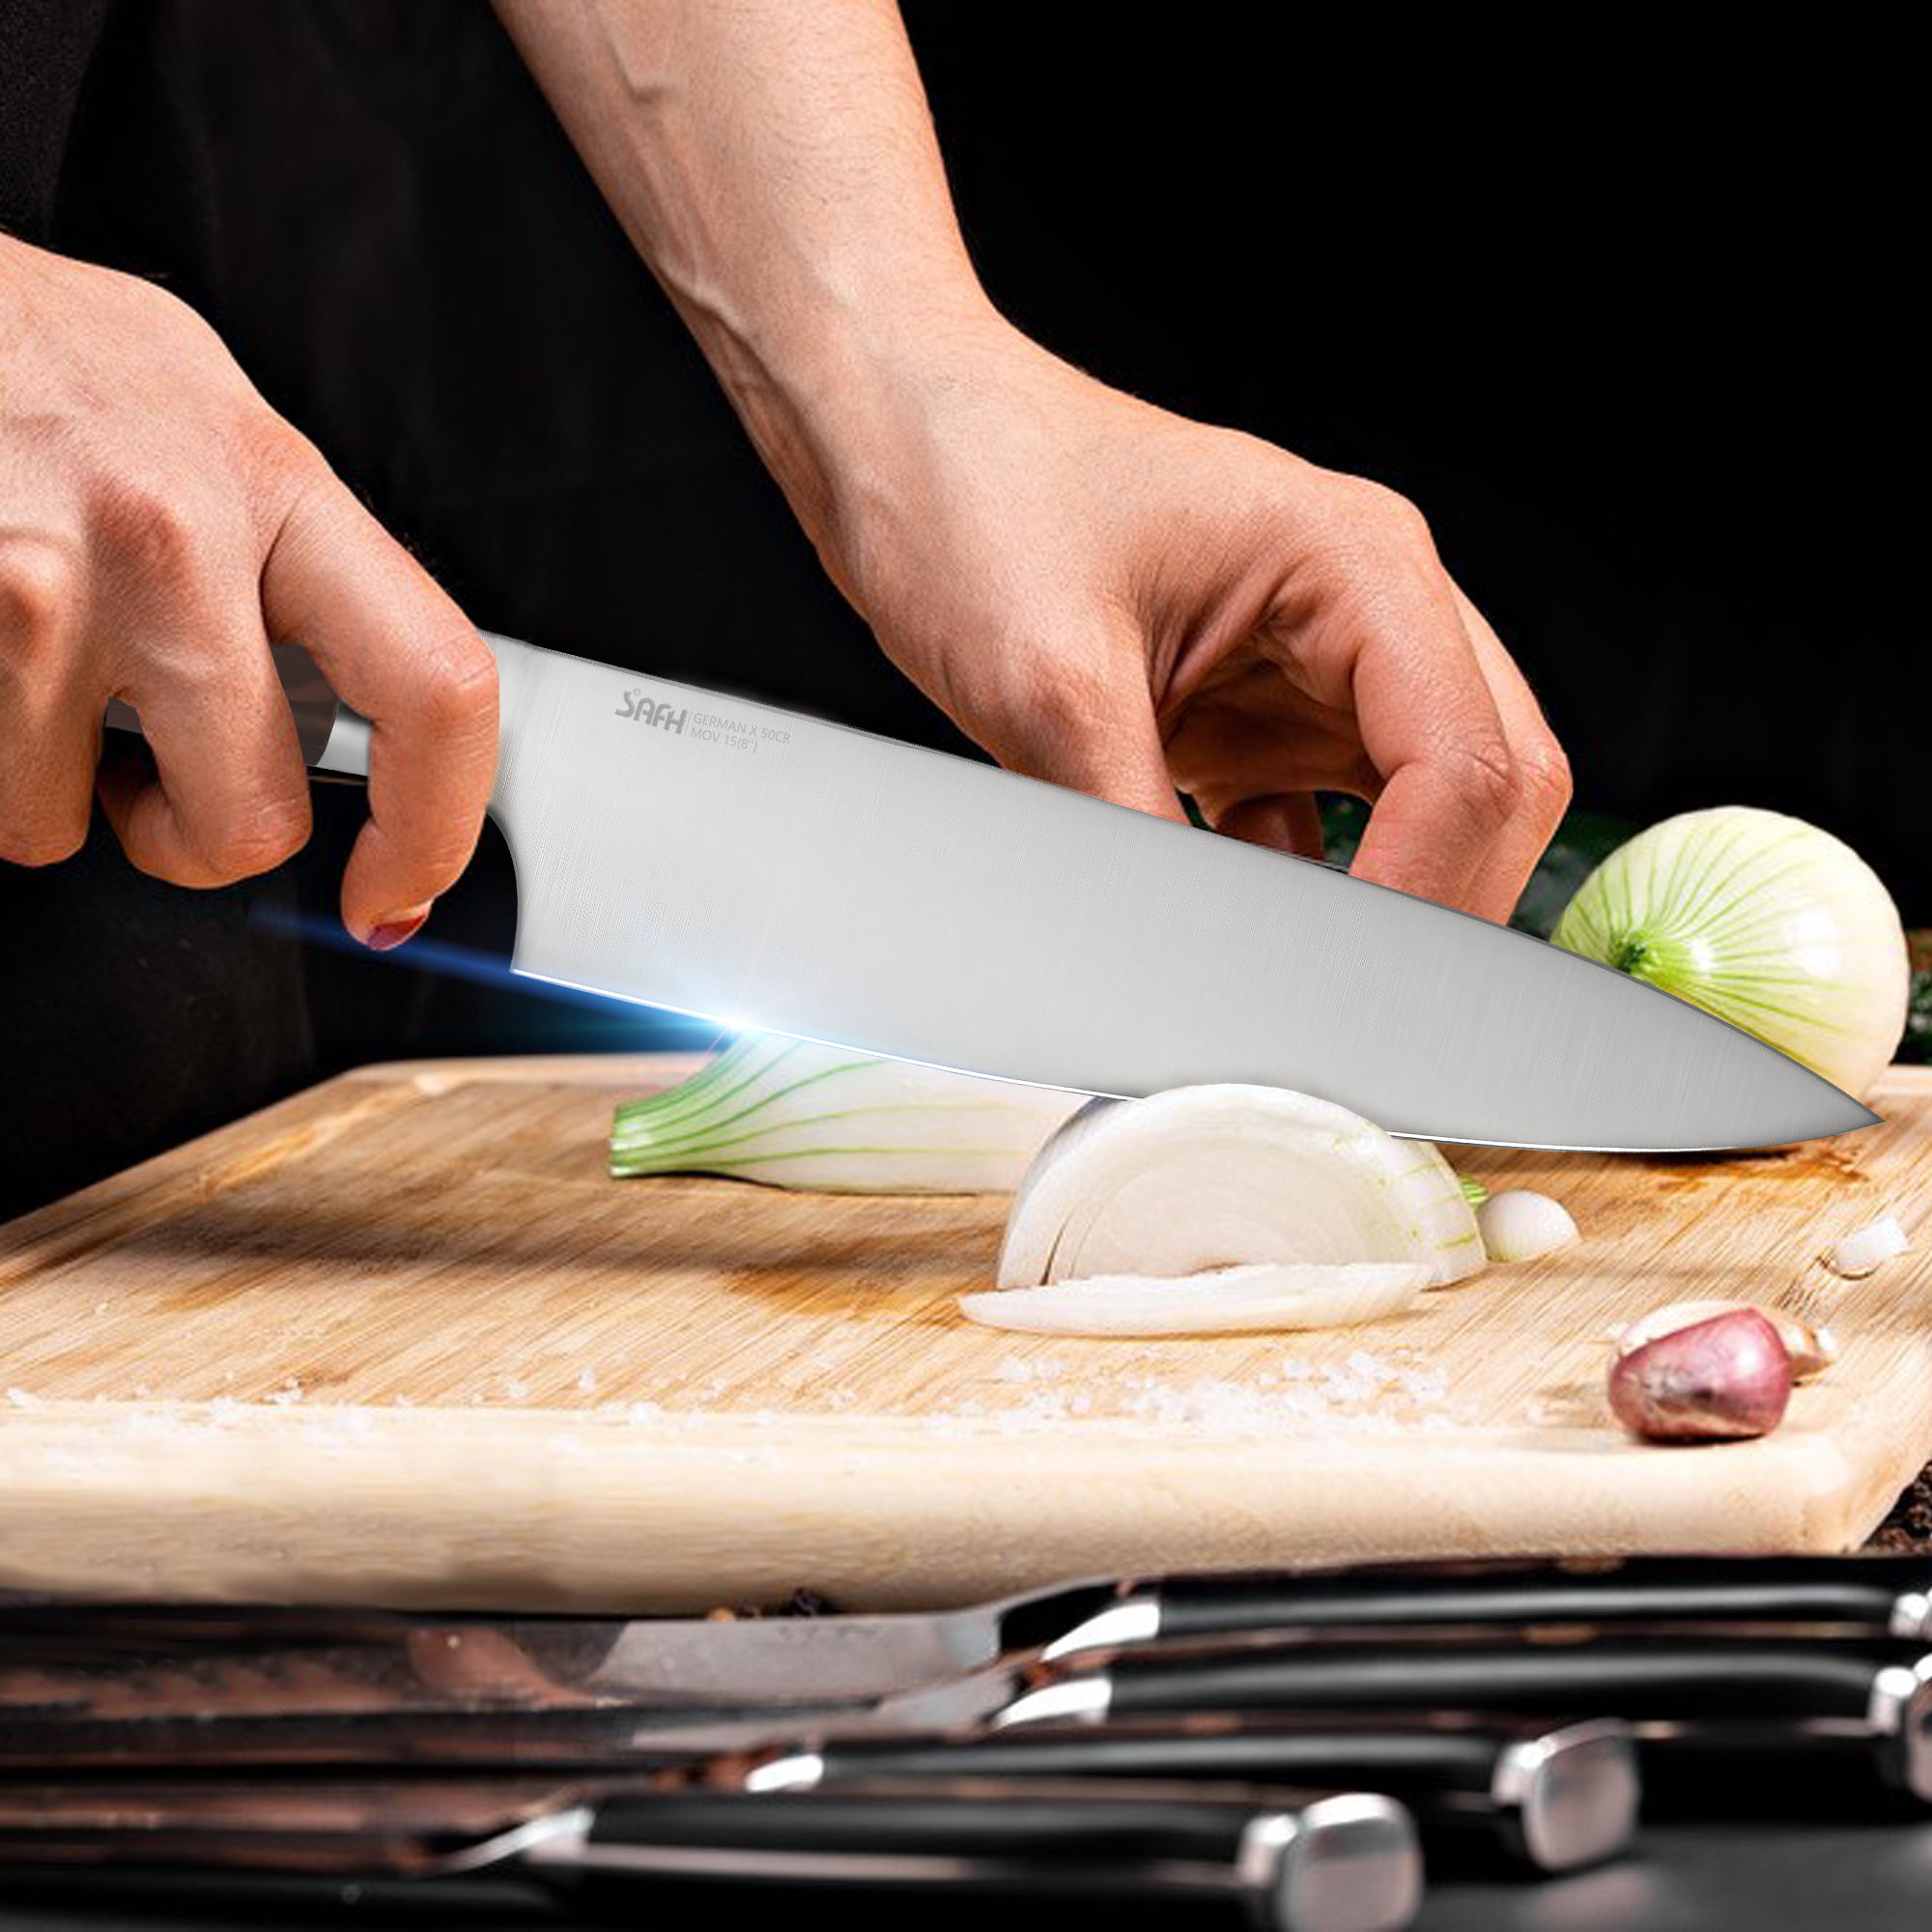 Professional Cutlery - 8 Inch Stainless Steel Chef Knife - Backed by a -  Kitchintelligence